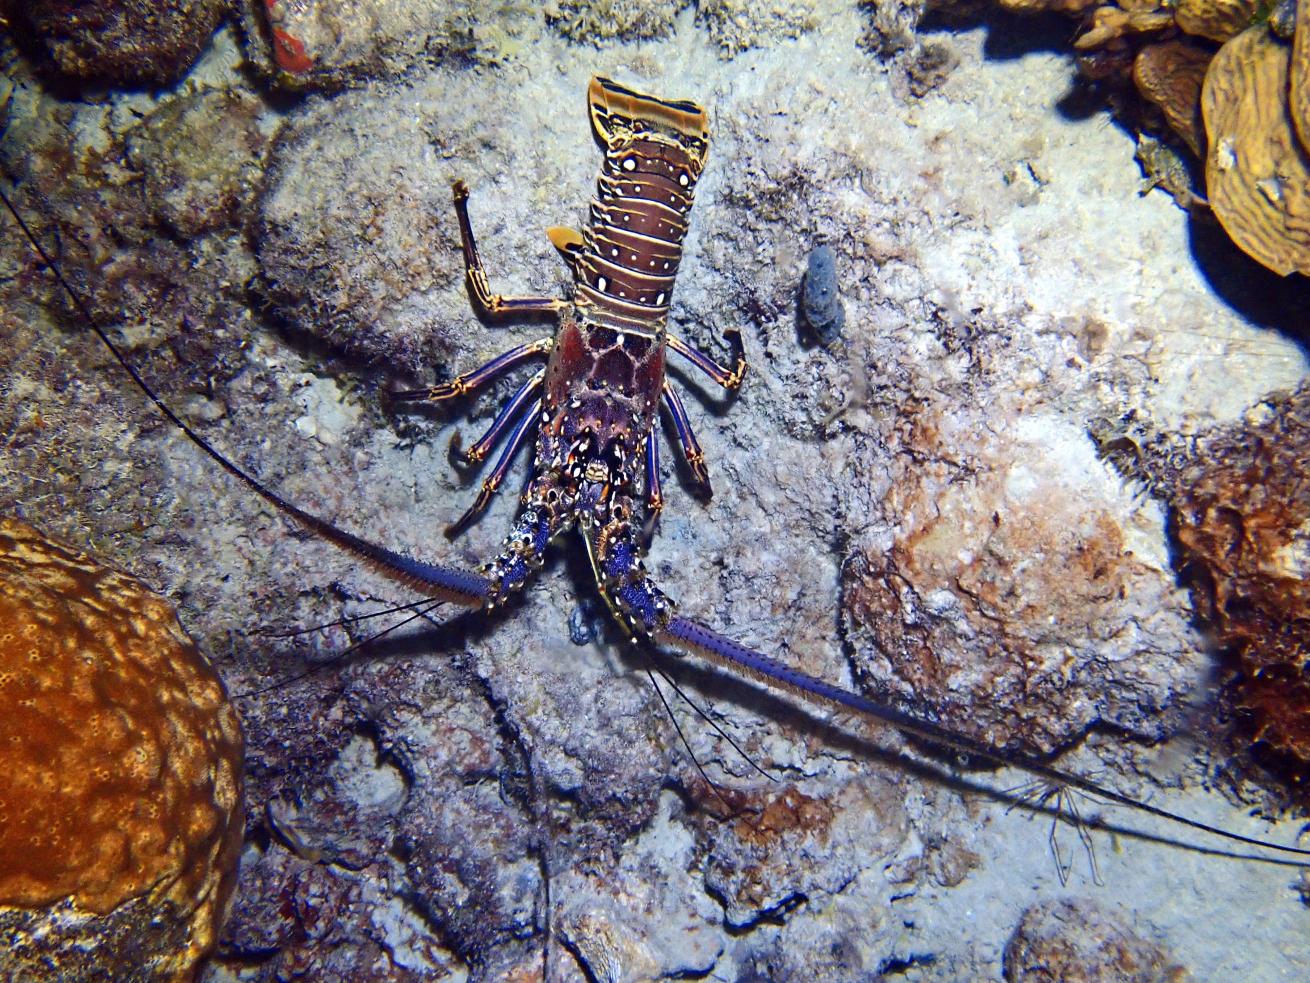 A large spiny lobster peeks out of the reef near the Salt Pier